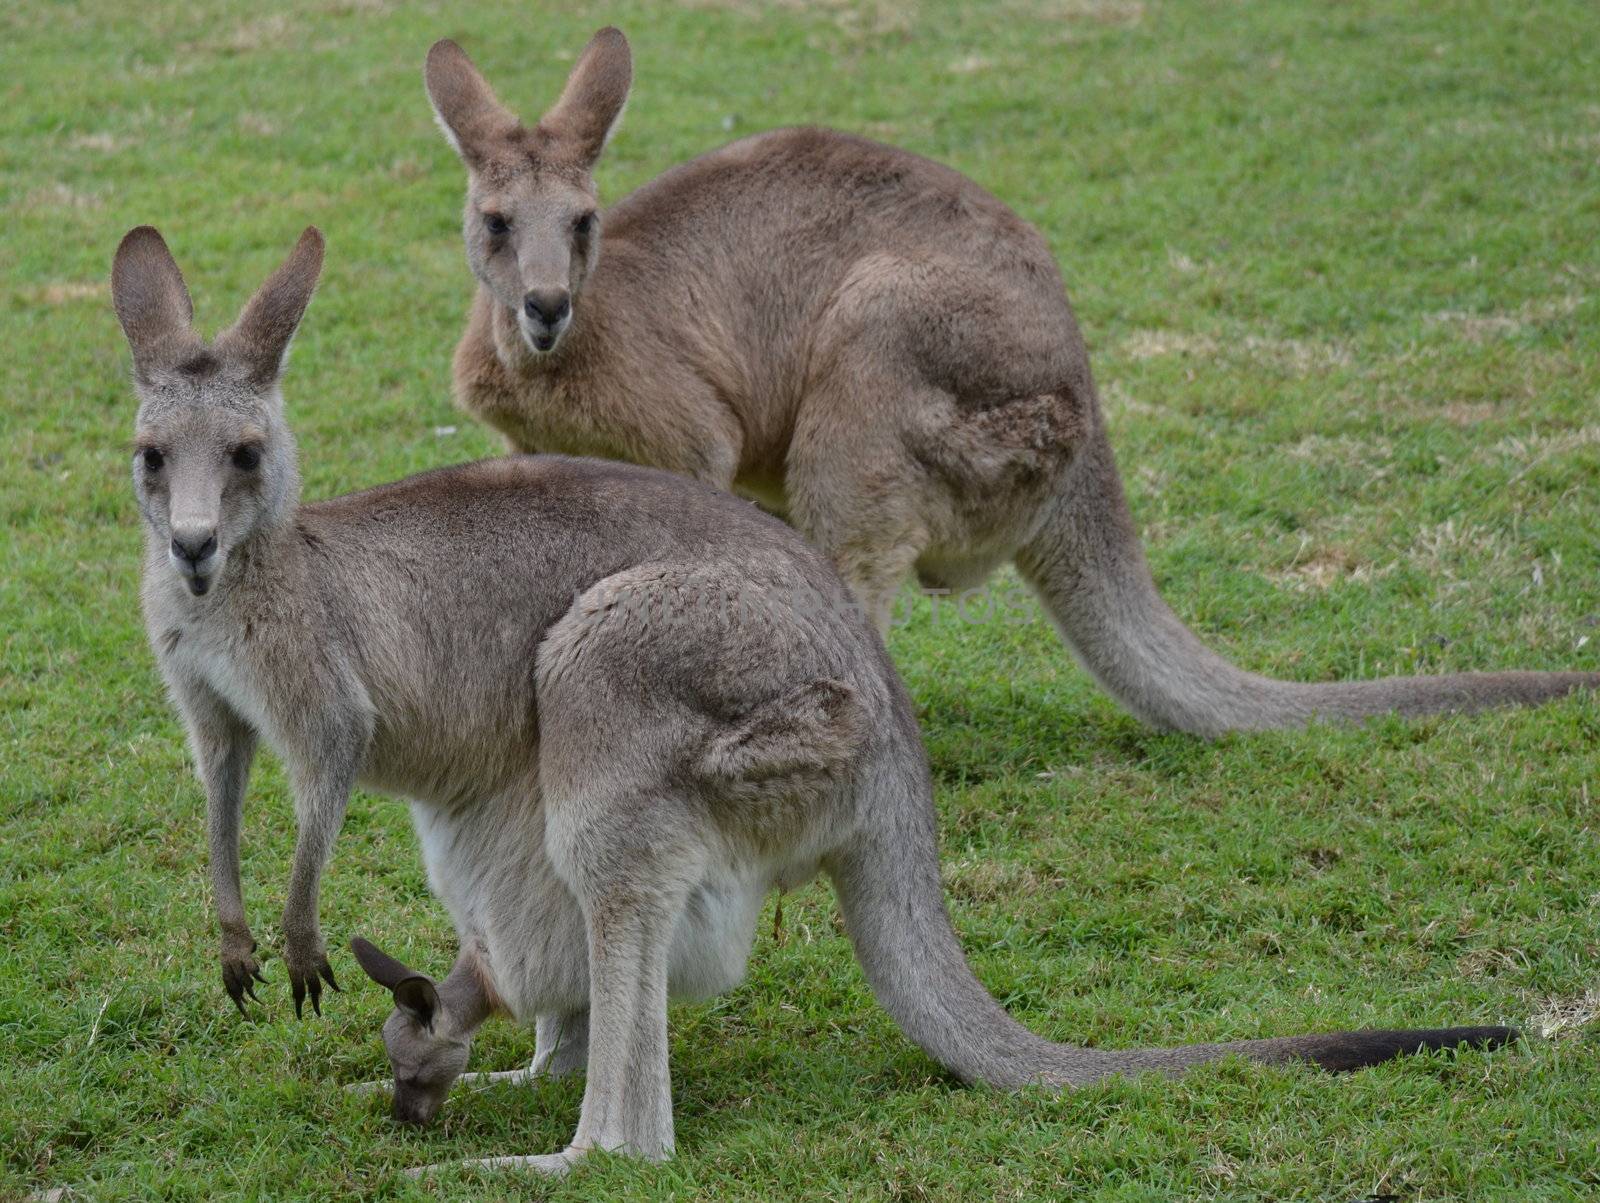 Full body profile shot of two Australian Kangaroos with a baby joey in the pouch